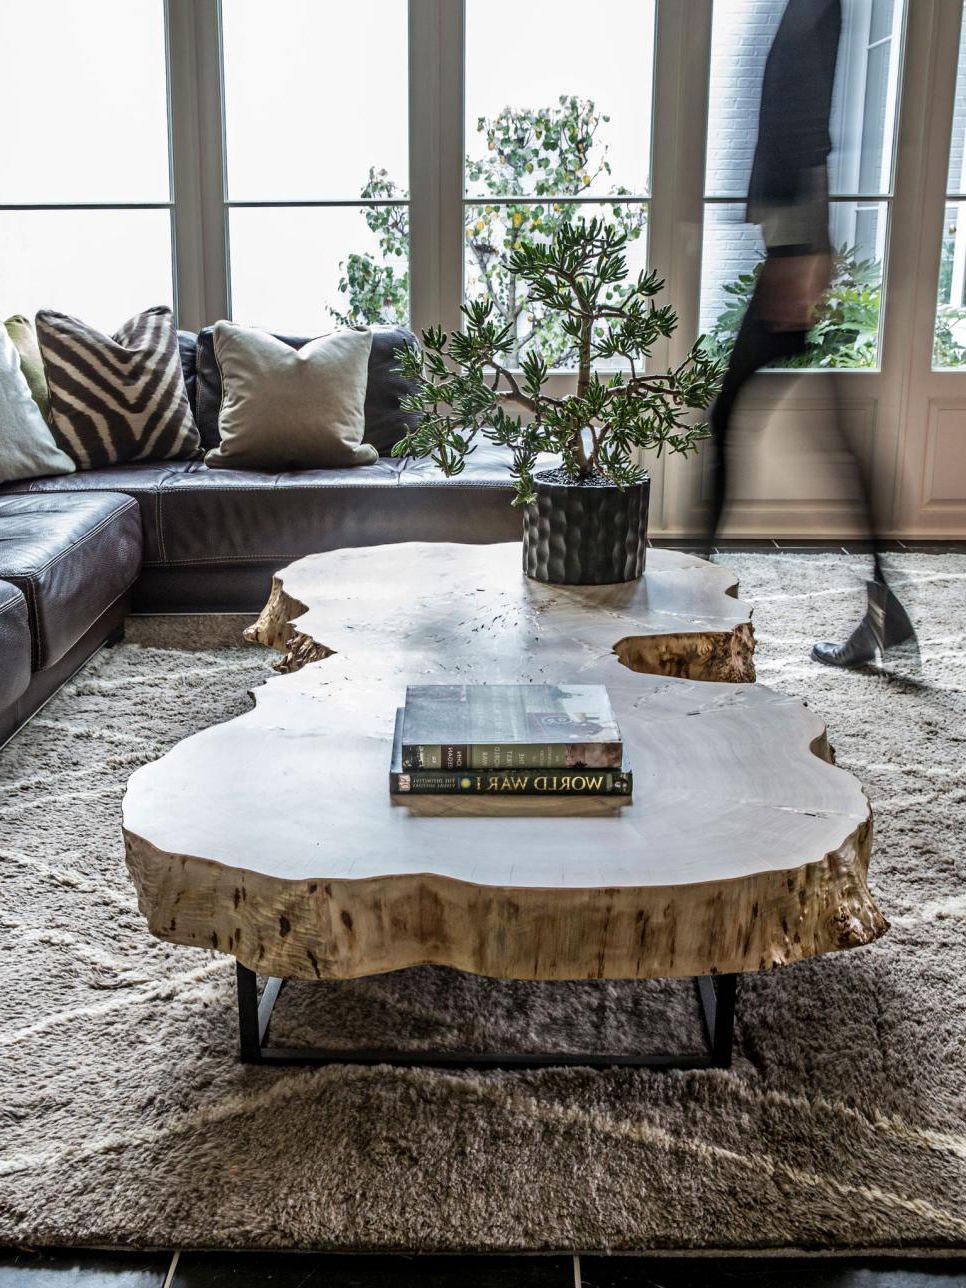 Widely Used Rustic Espresso Wood Coffee Tables With Regard To Rustic Tree Trunk Coffee Table (Gallery 12 of 20)